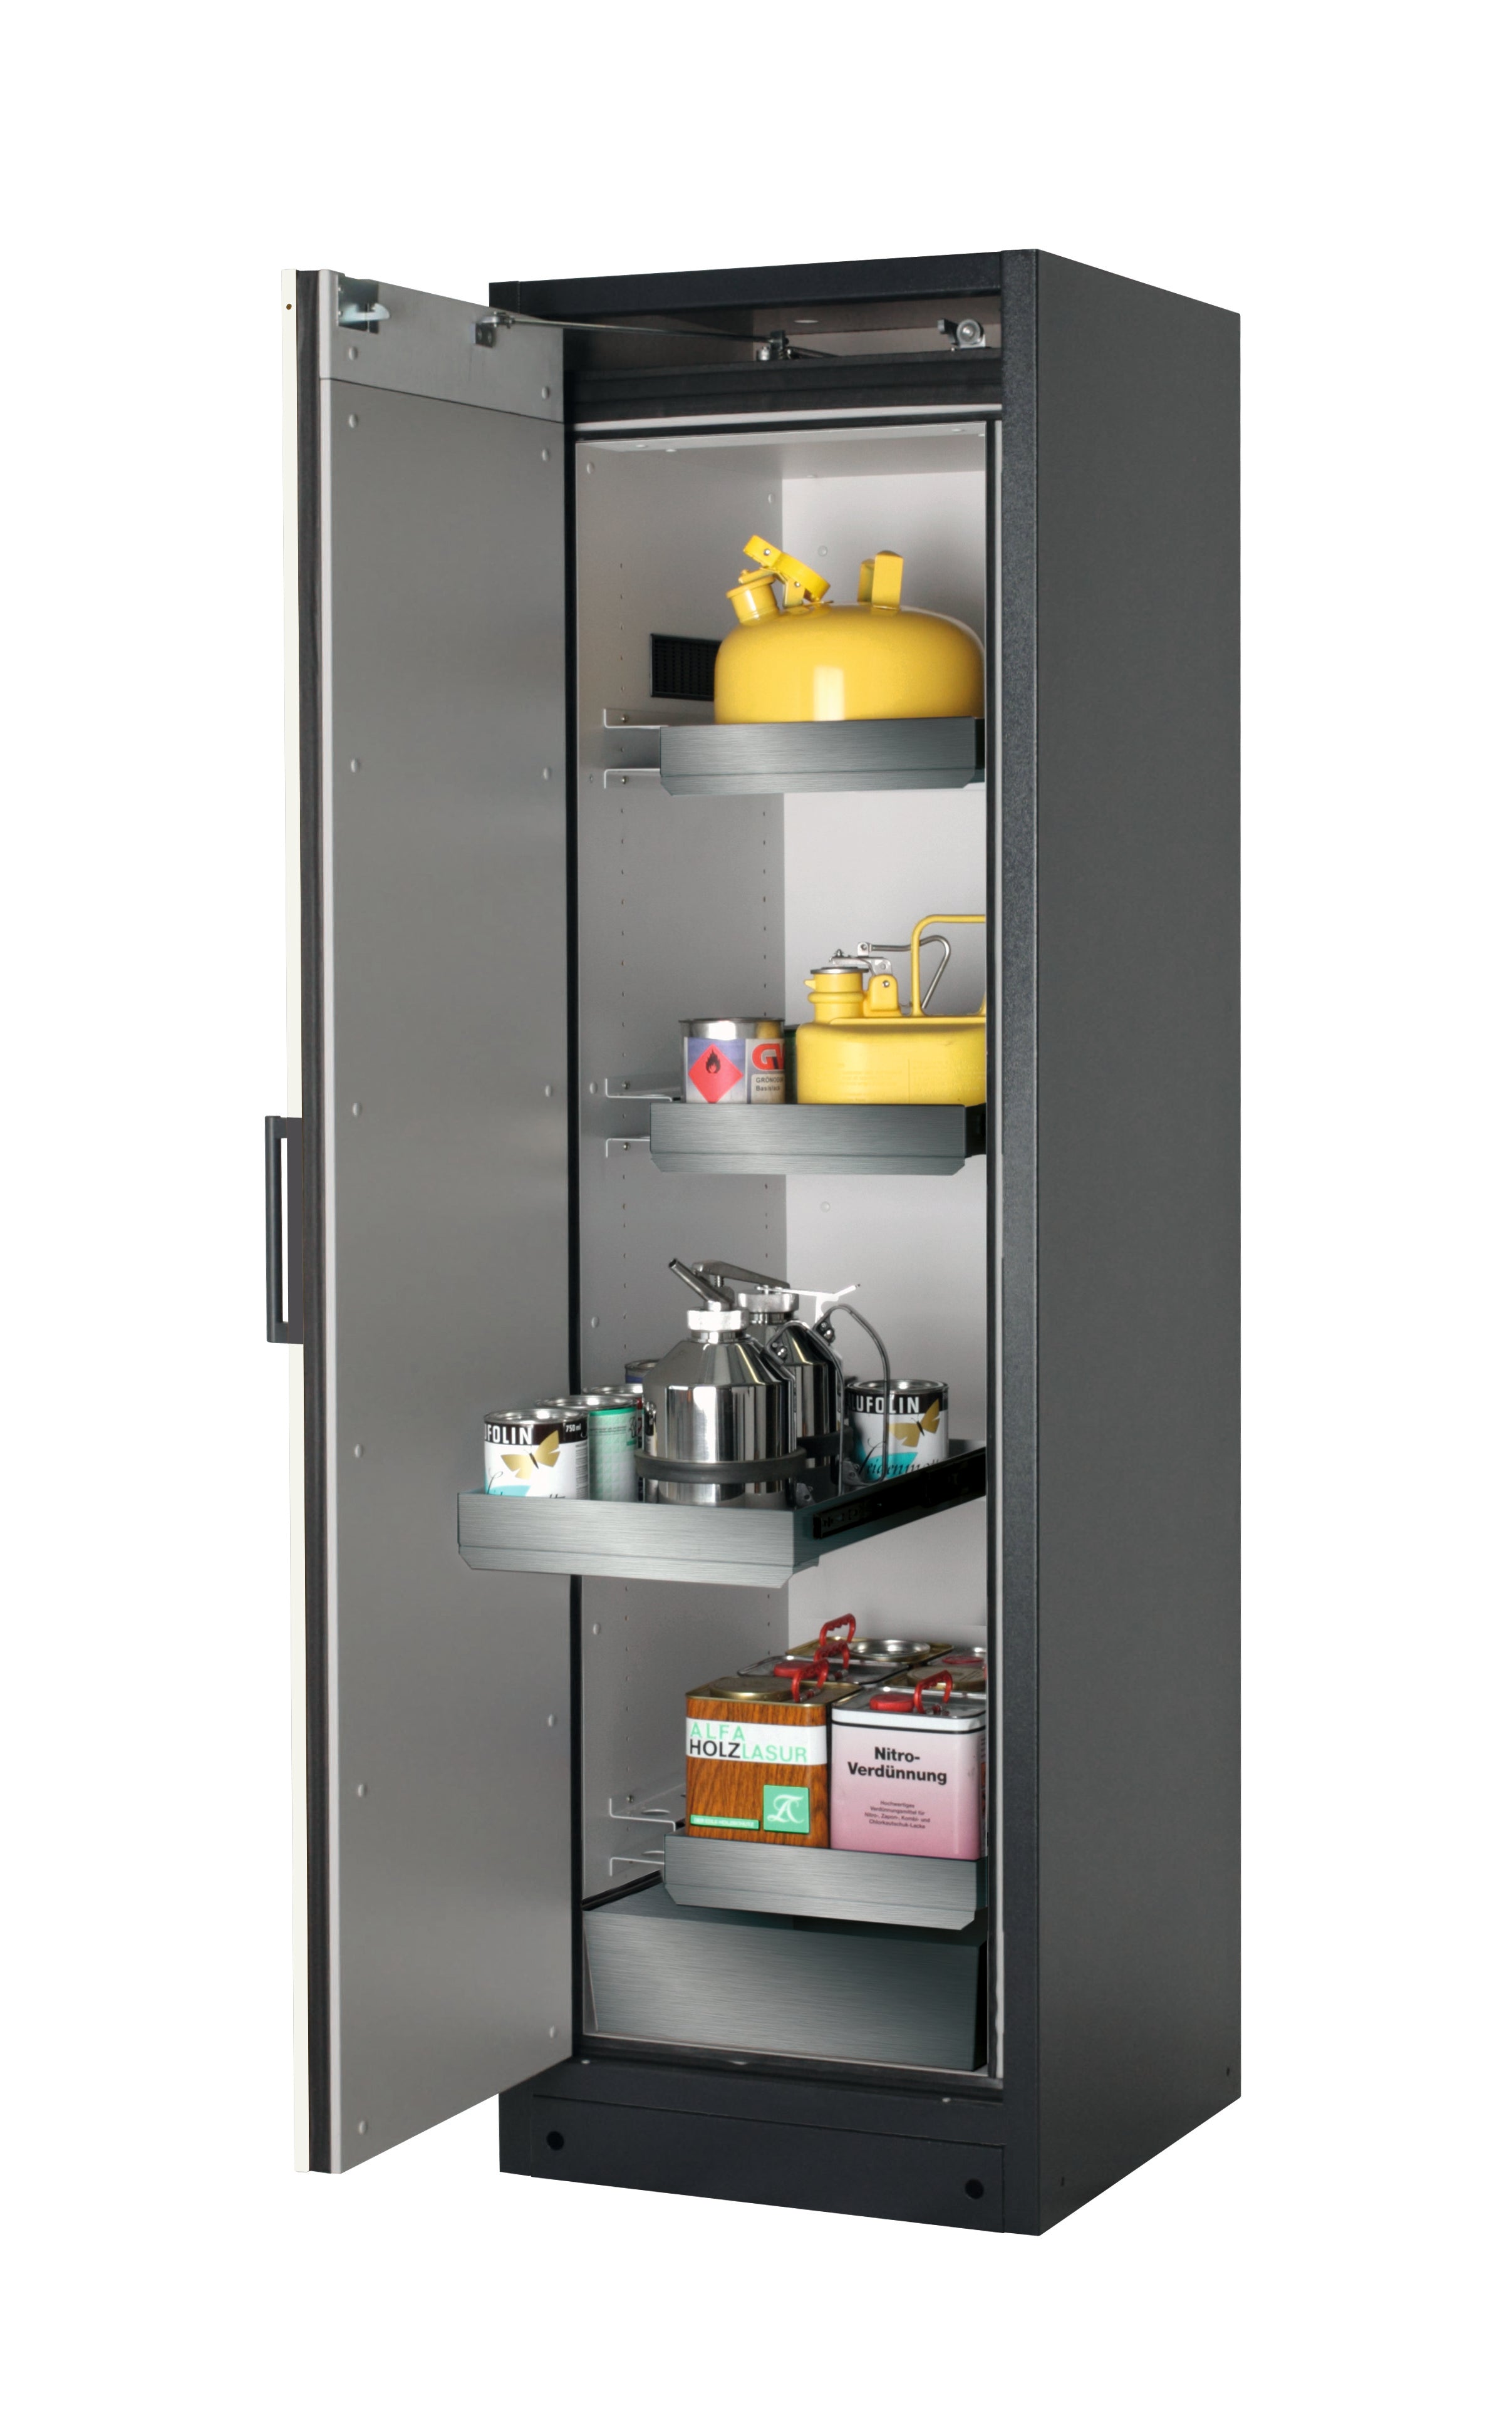 Type 90 safety storage cabinet Q-PEGASUS-90 model Q90.195.060.WDAC in asecos silver with 3x drawer (standard) (stainless steel 1.4301),